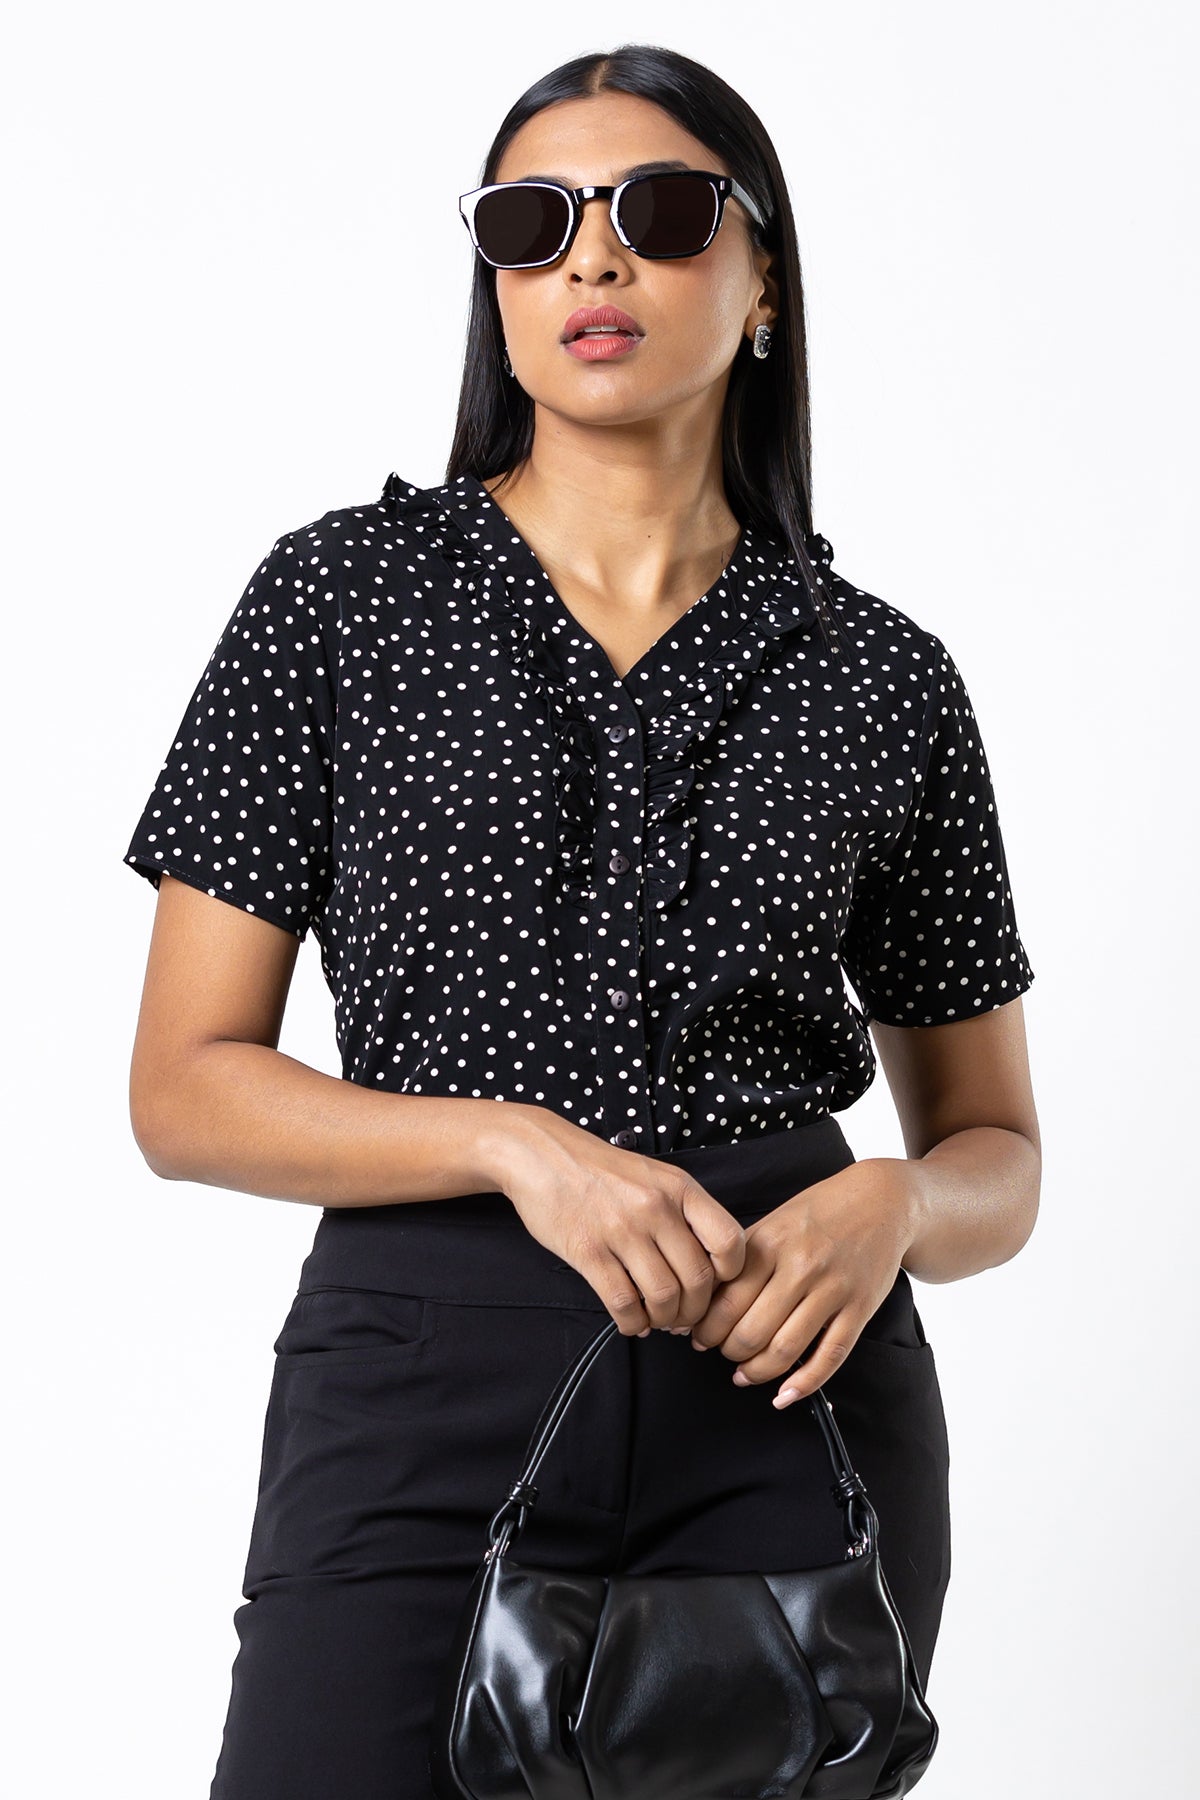 Envogue Women's Short Sleeve With Frill Dotted Office Blouse